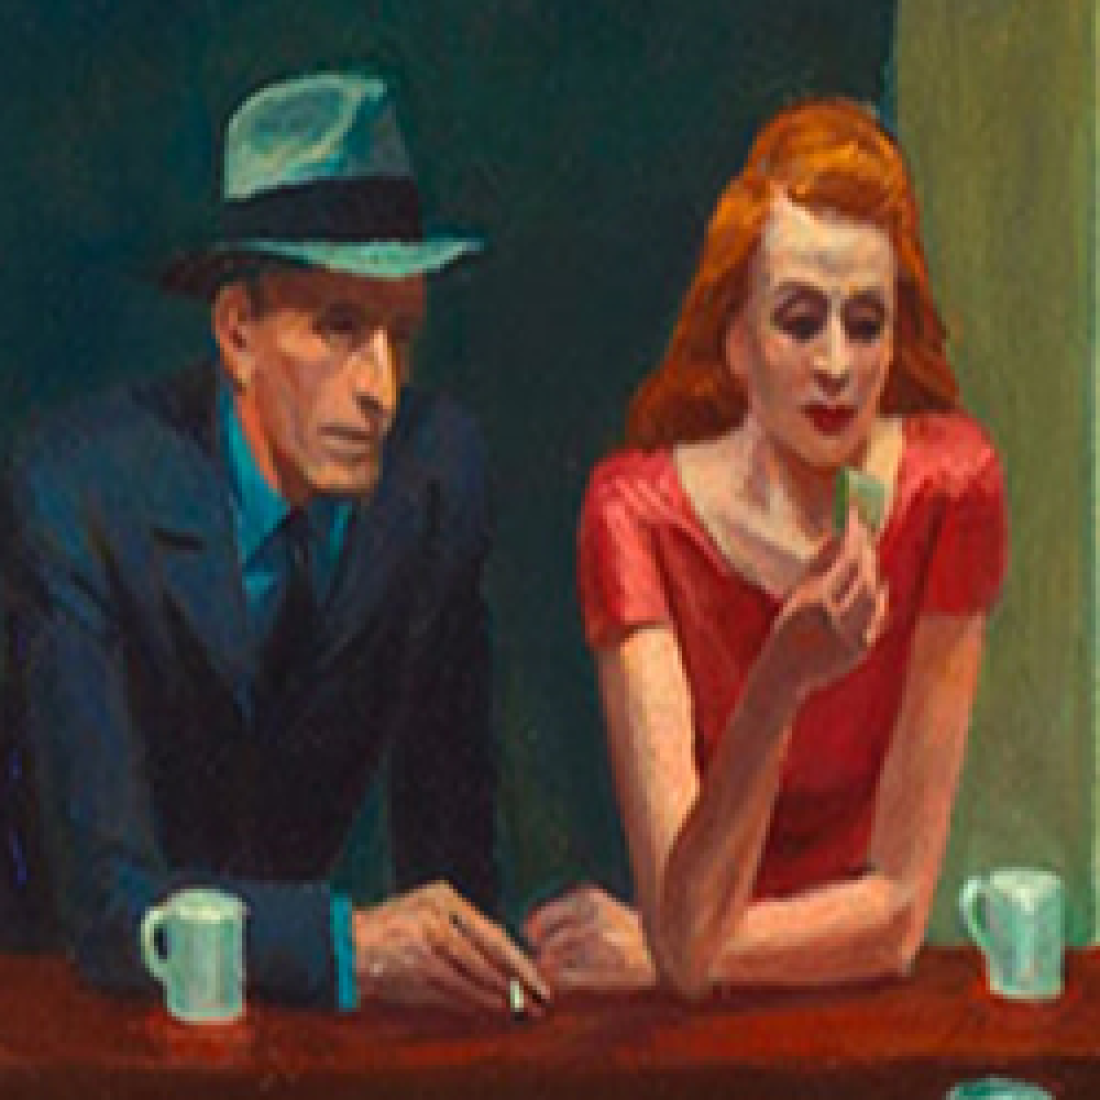 Artistic depiction of a man and woman with coffee mugs inside a mid-twentieth-century diner